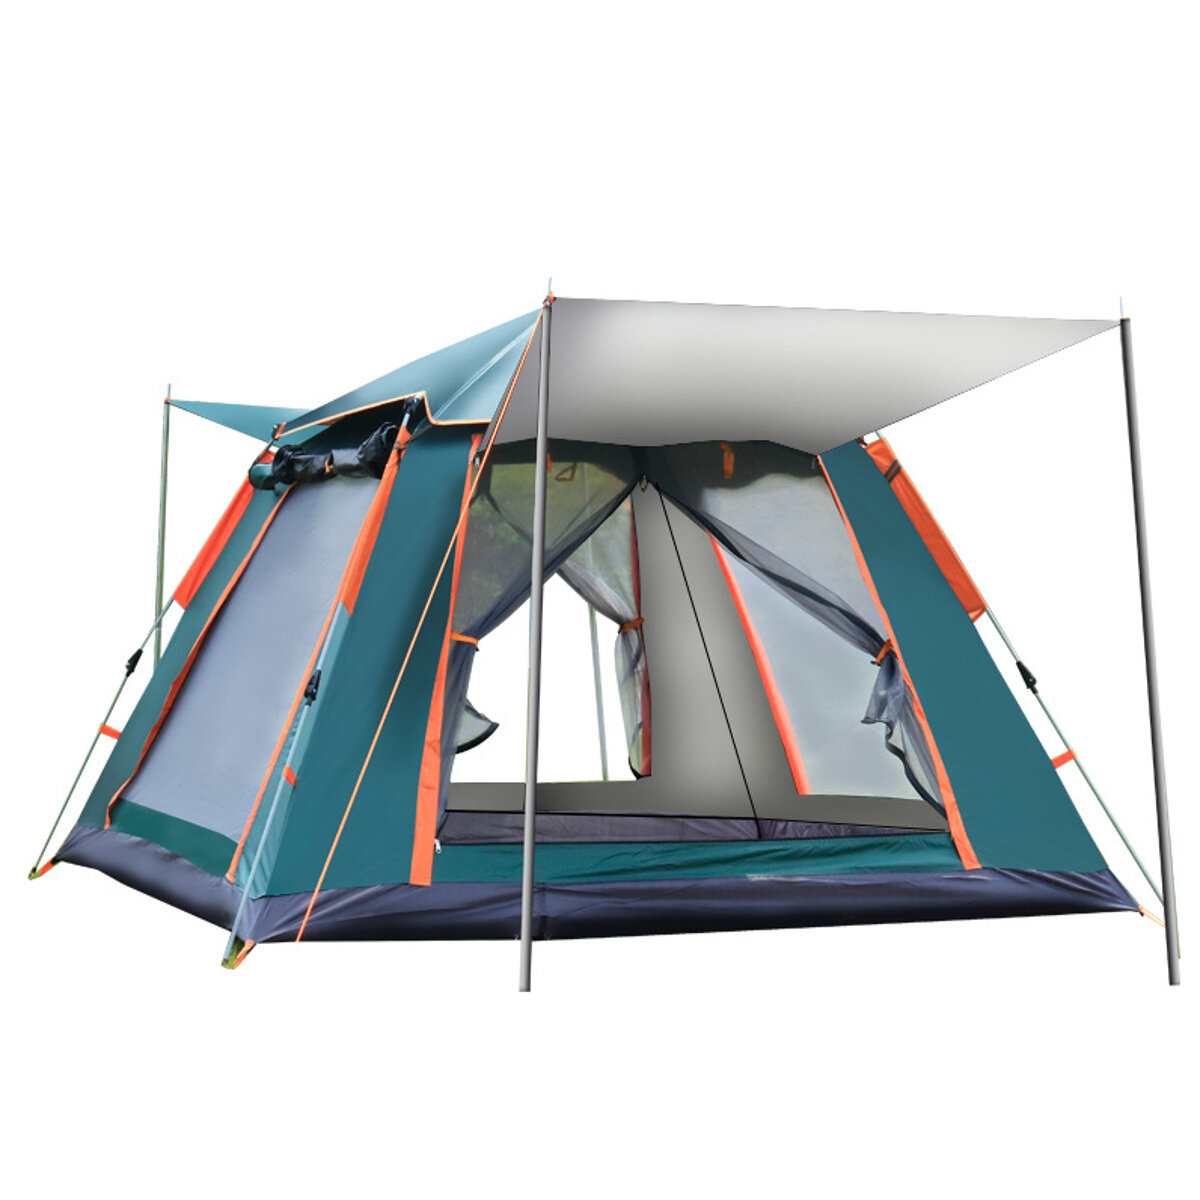 IPRee® 6-7 People Fully Automatic Tent Silver Glue Rainproof Windproof Outdoor Camping Family Picnic Travel Tent